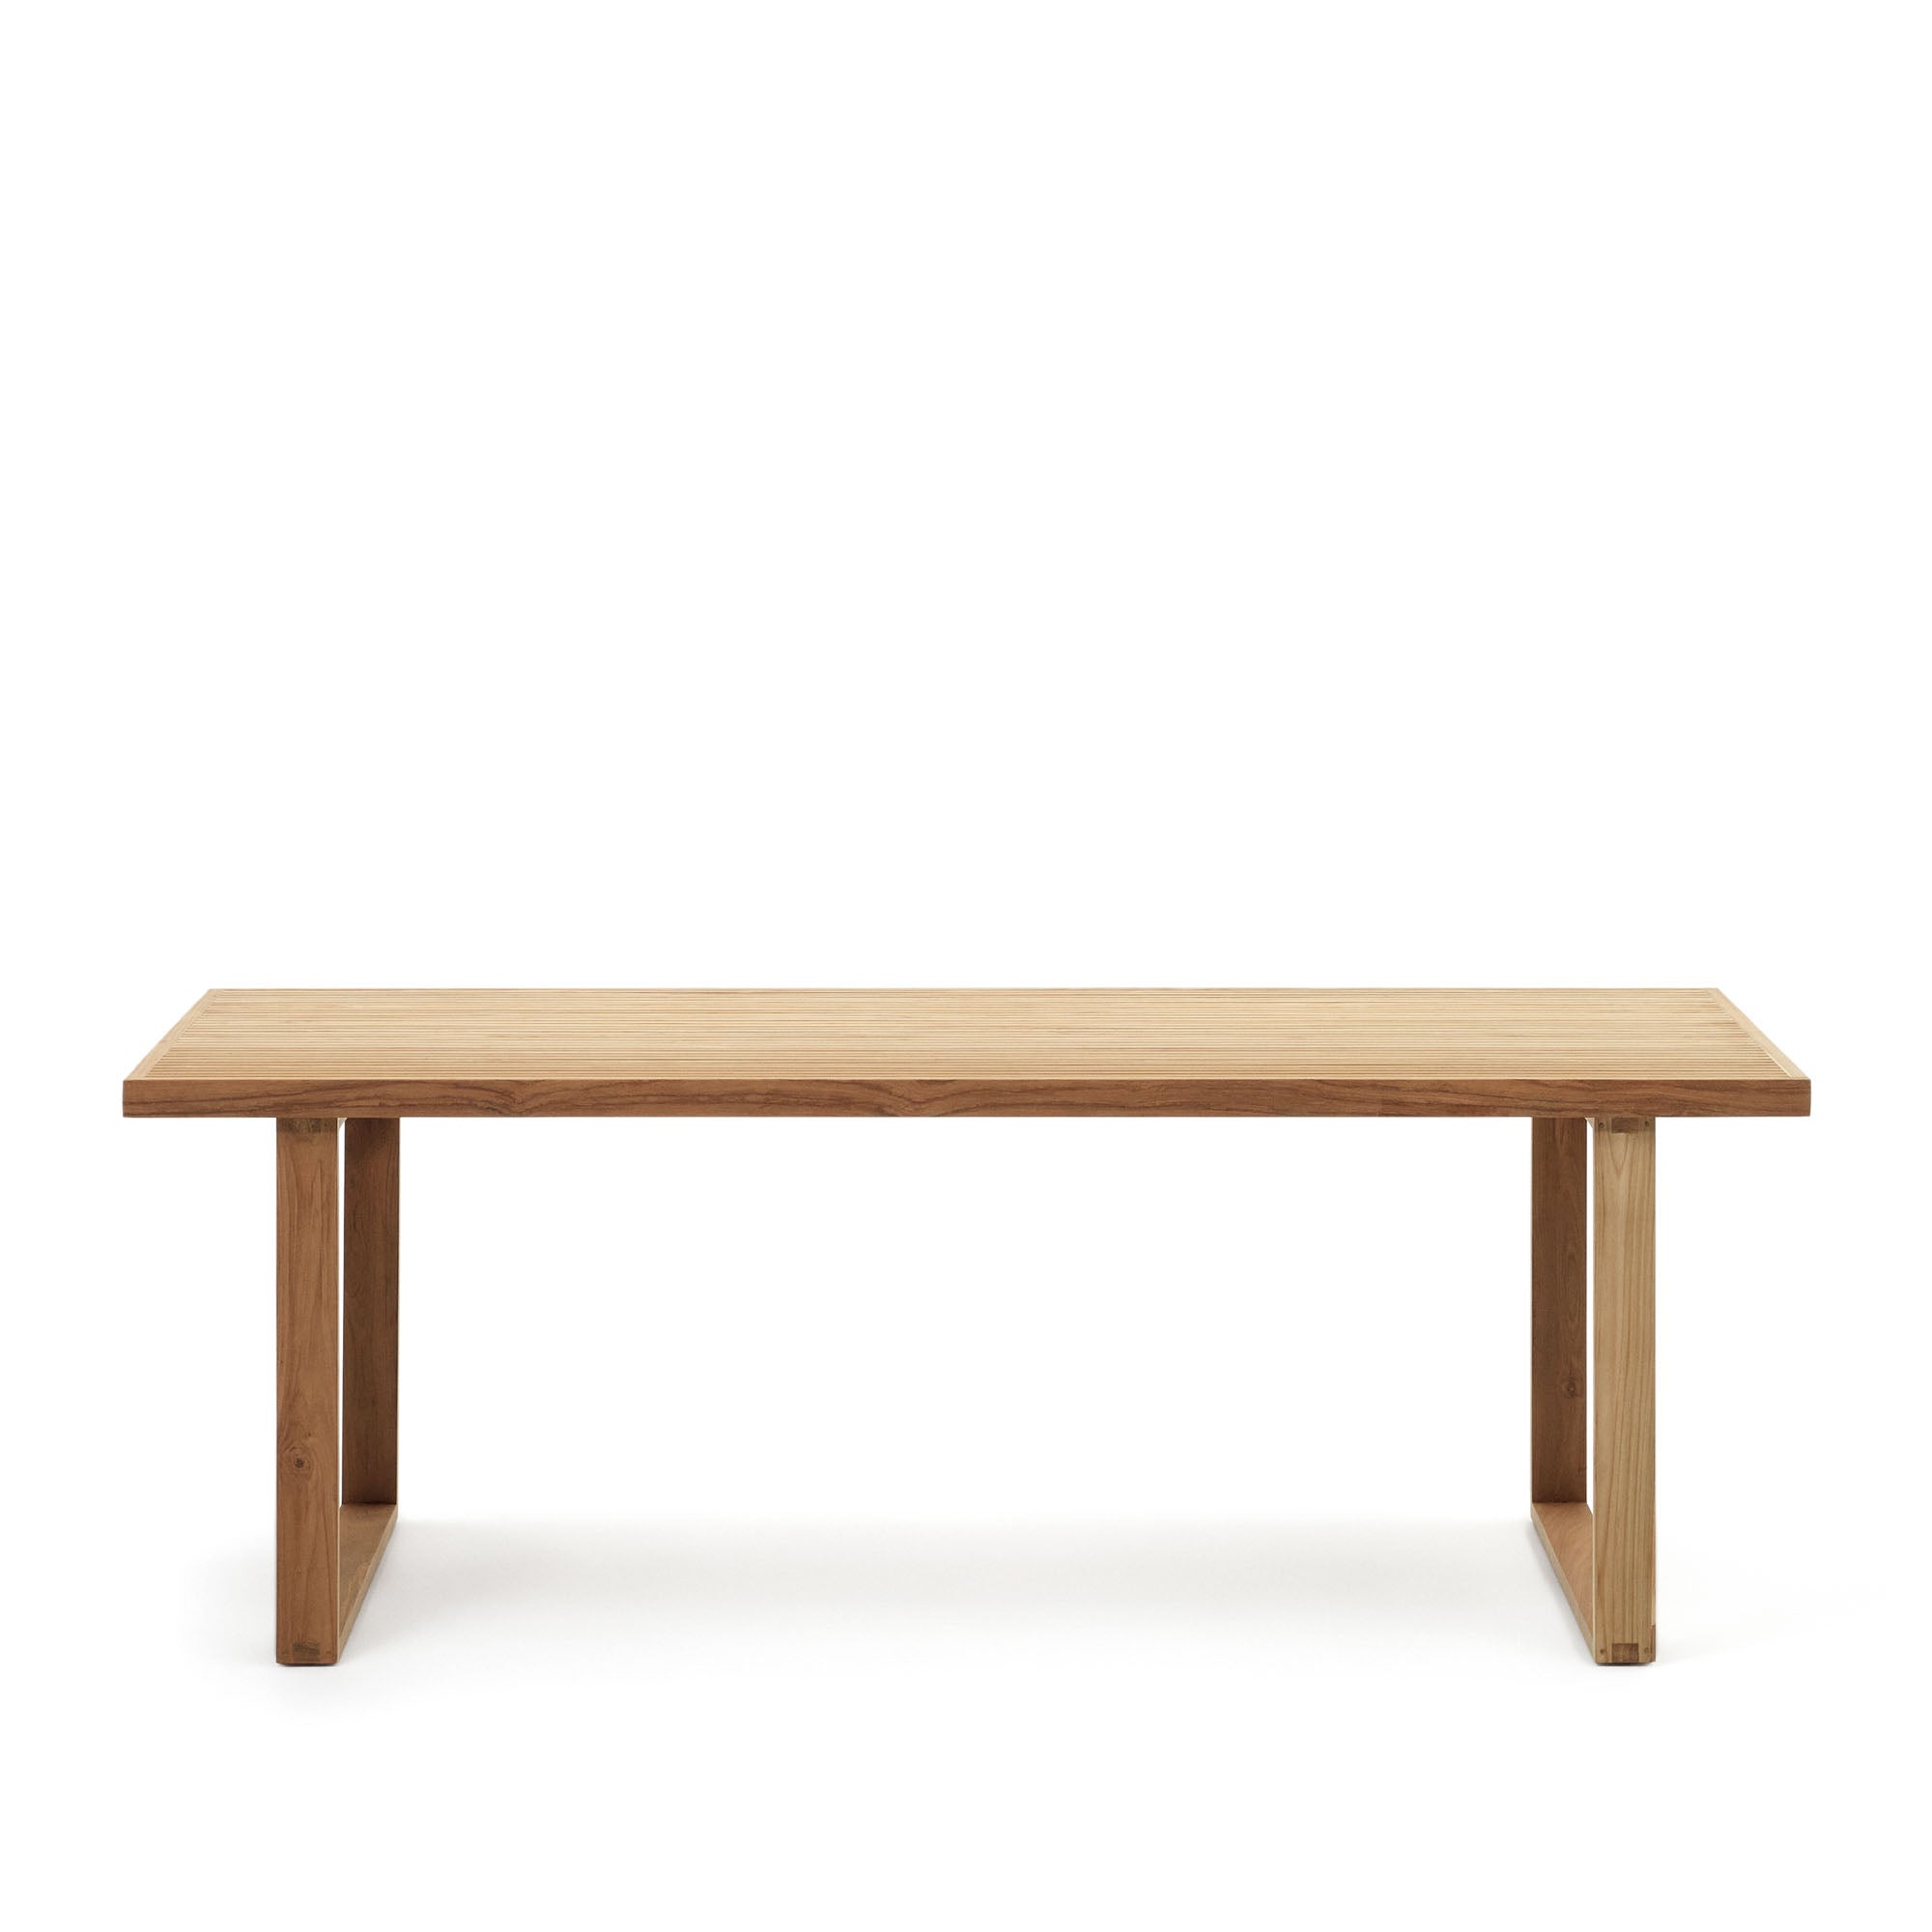 Canadell 100% outdoor solid recycled teak table, 220 x 100 cm